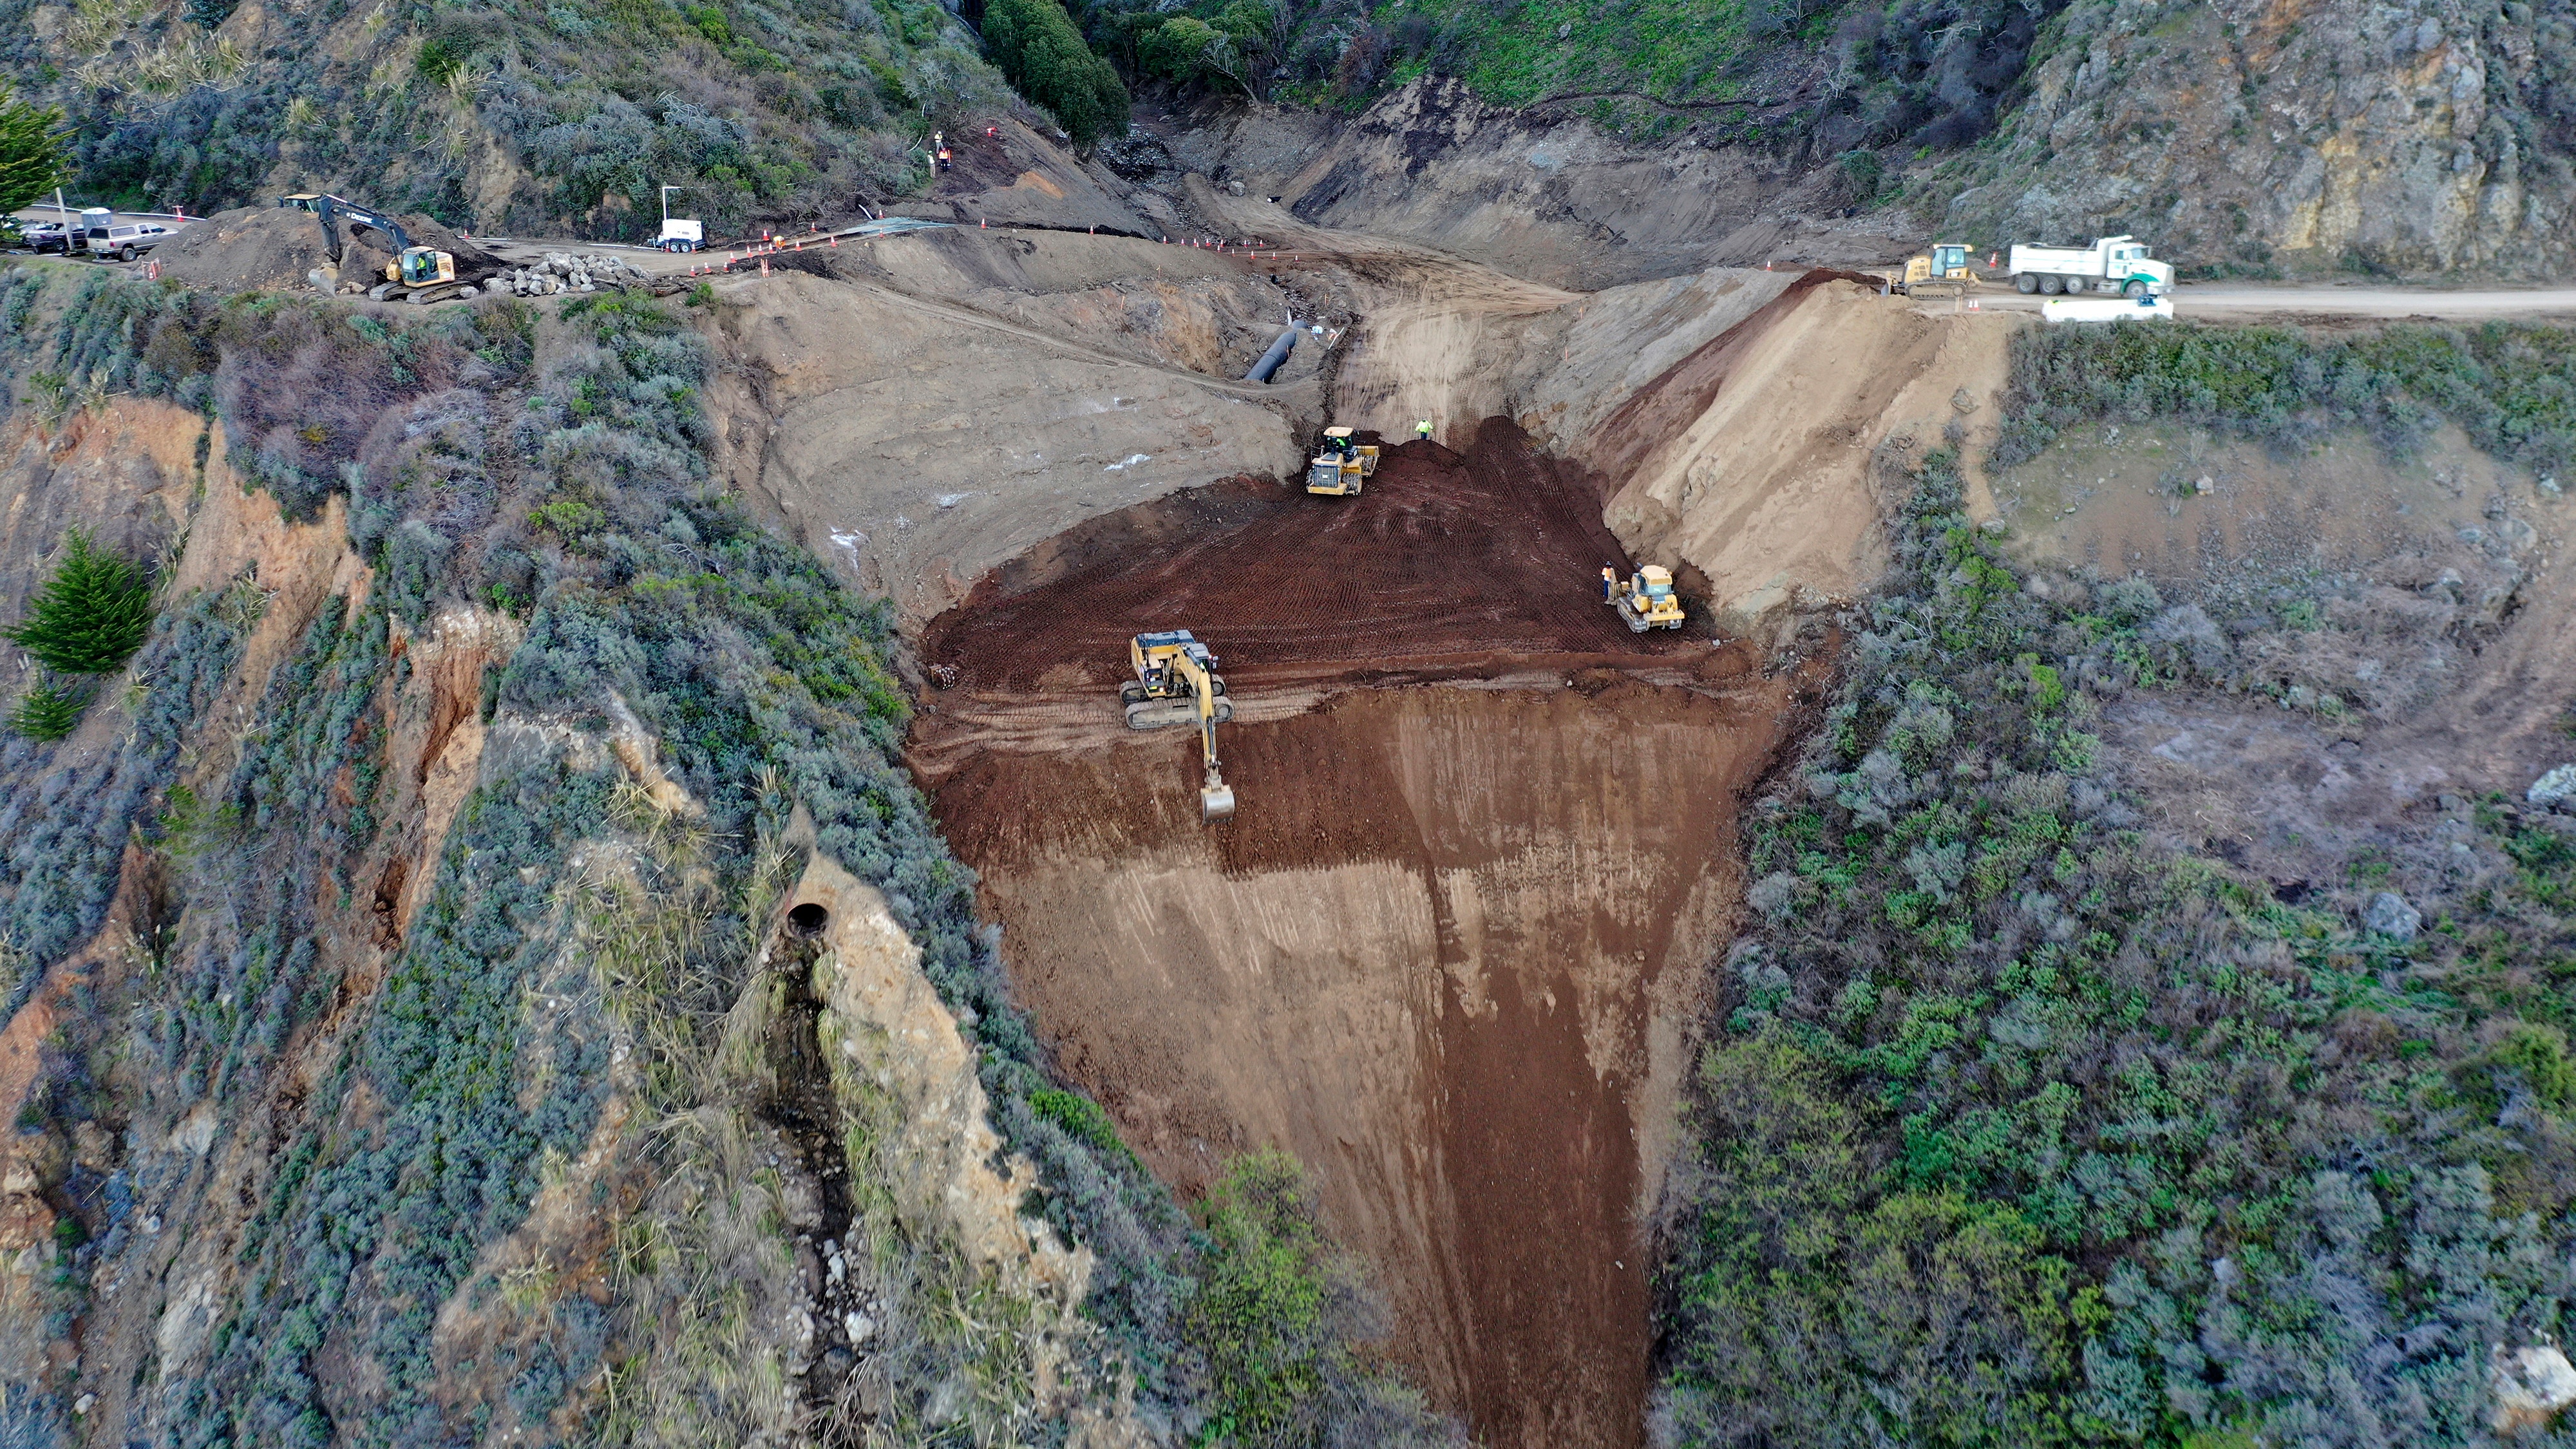 California's iconic Highway 1 to reopen ahead of schedule after mudslide damage